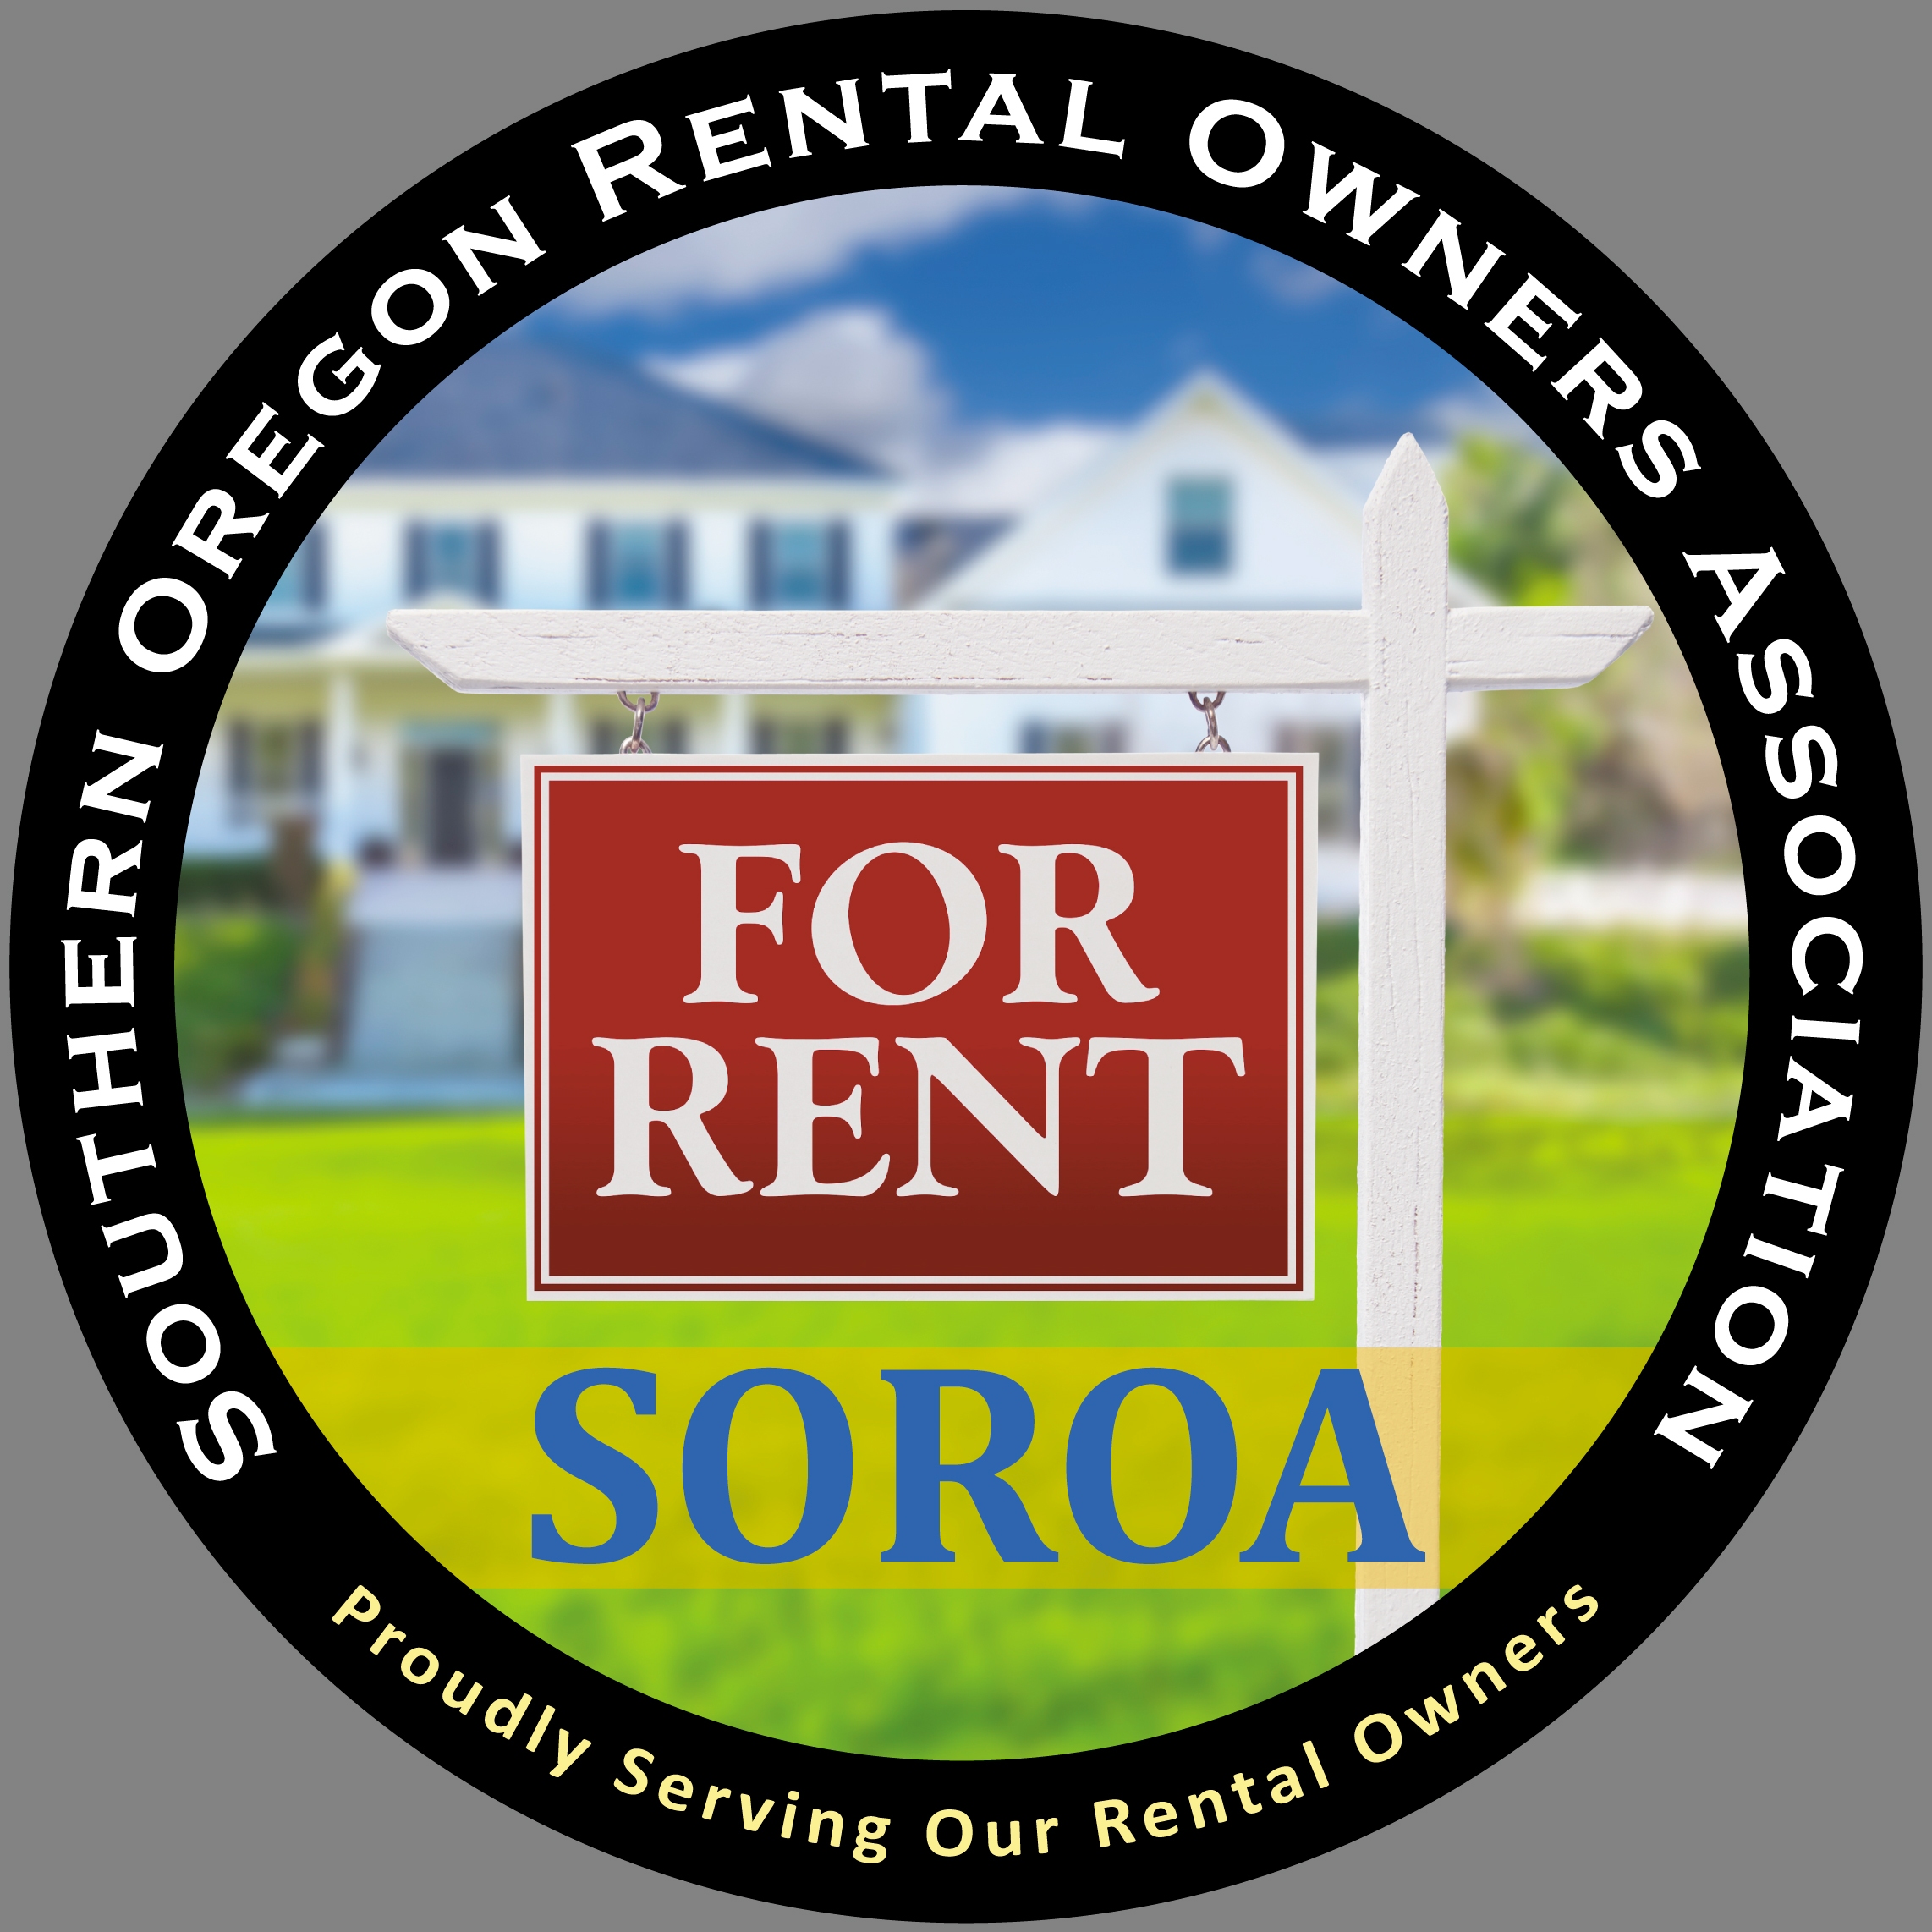 rental owners association for jackson and josephine counties in oregon